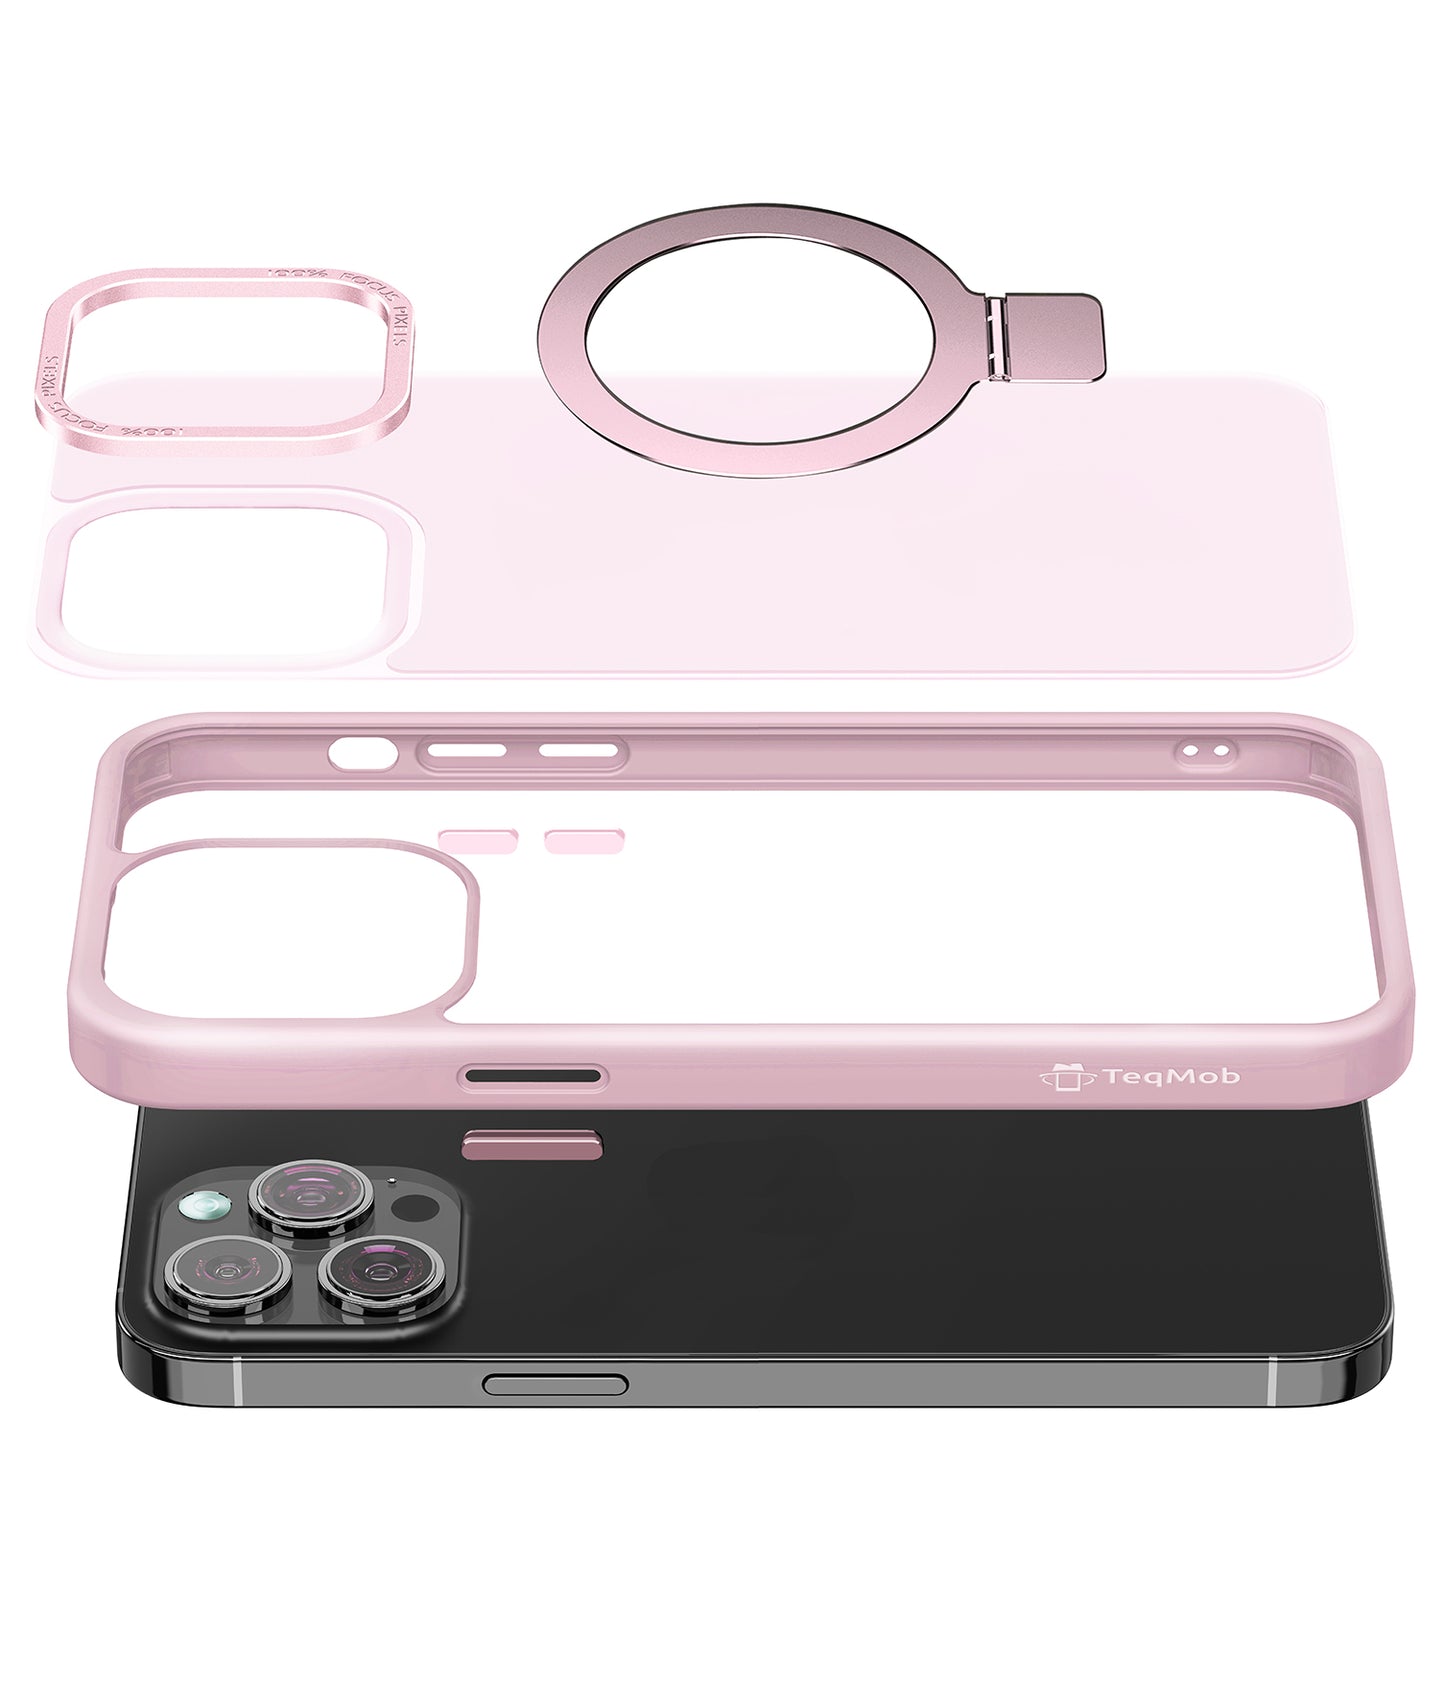 Pink Ringkick Frosted Case for iPhone 12 Pro Max